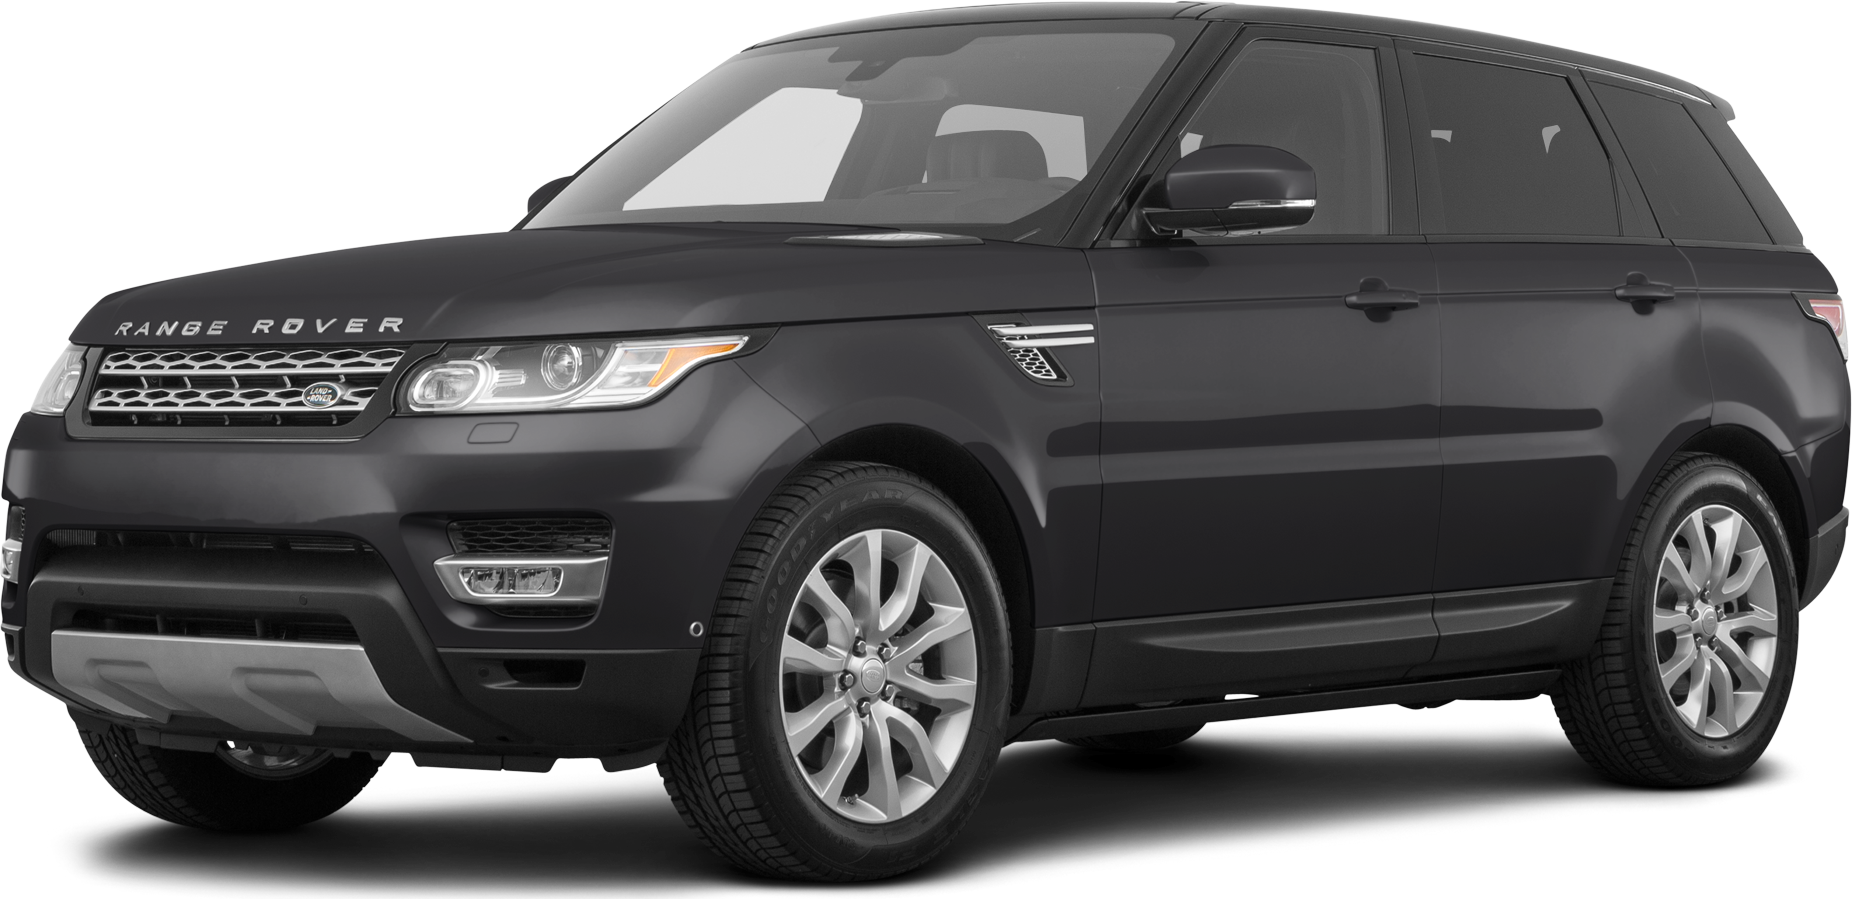 2017 Land Rover Range Rover Sport Price Value Ratings And Reviews